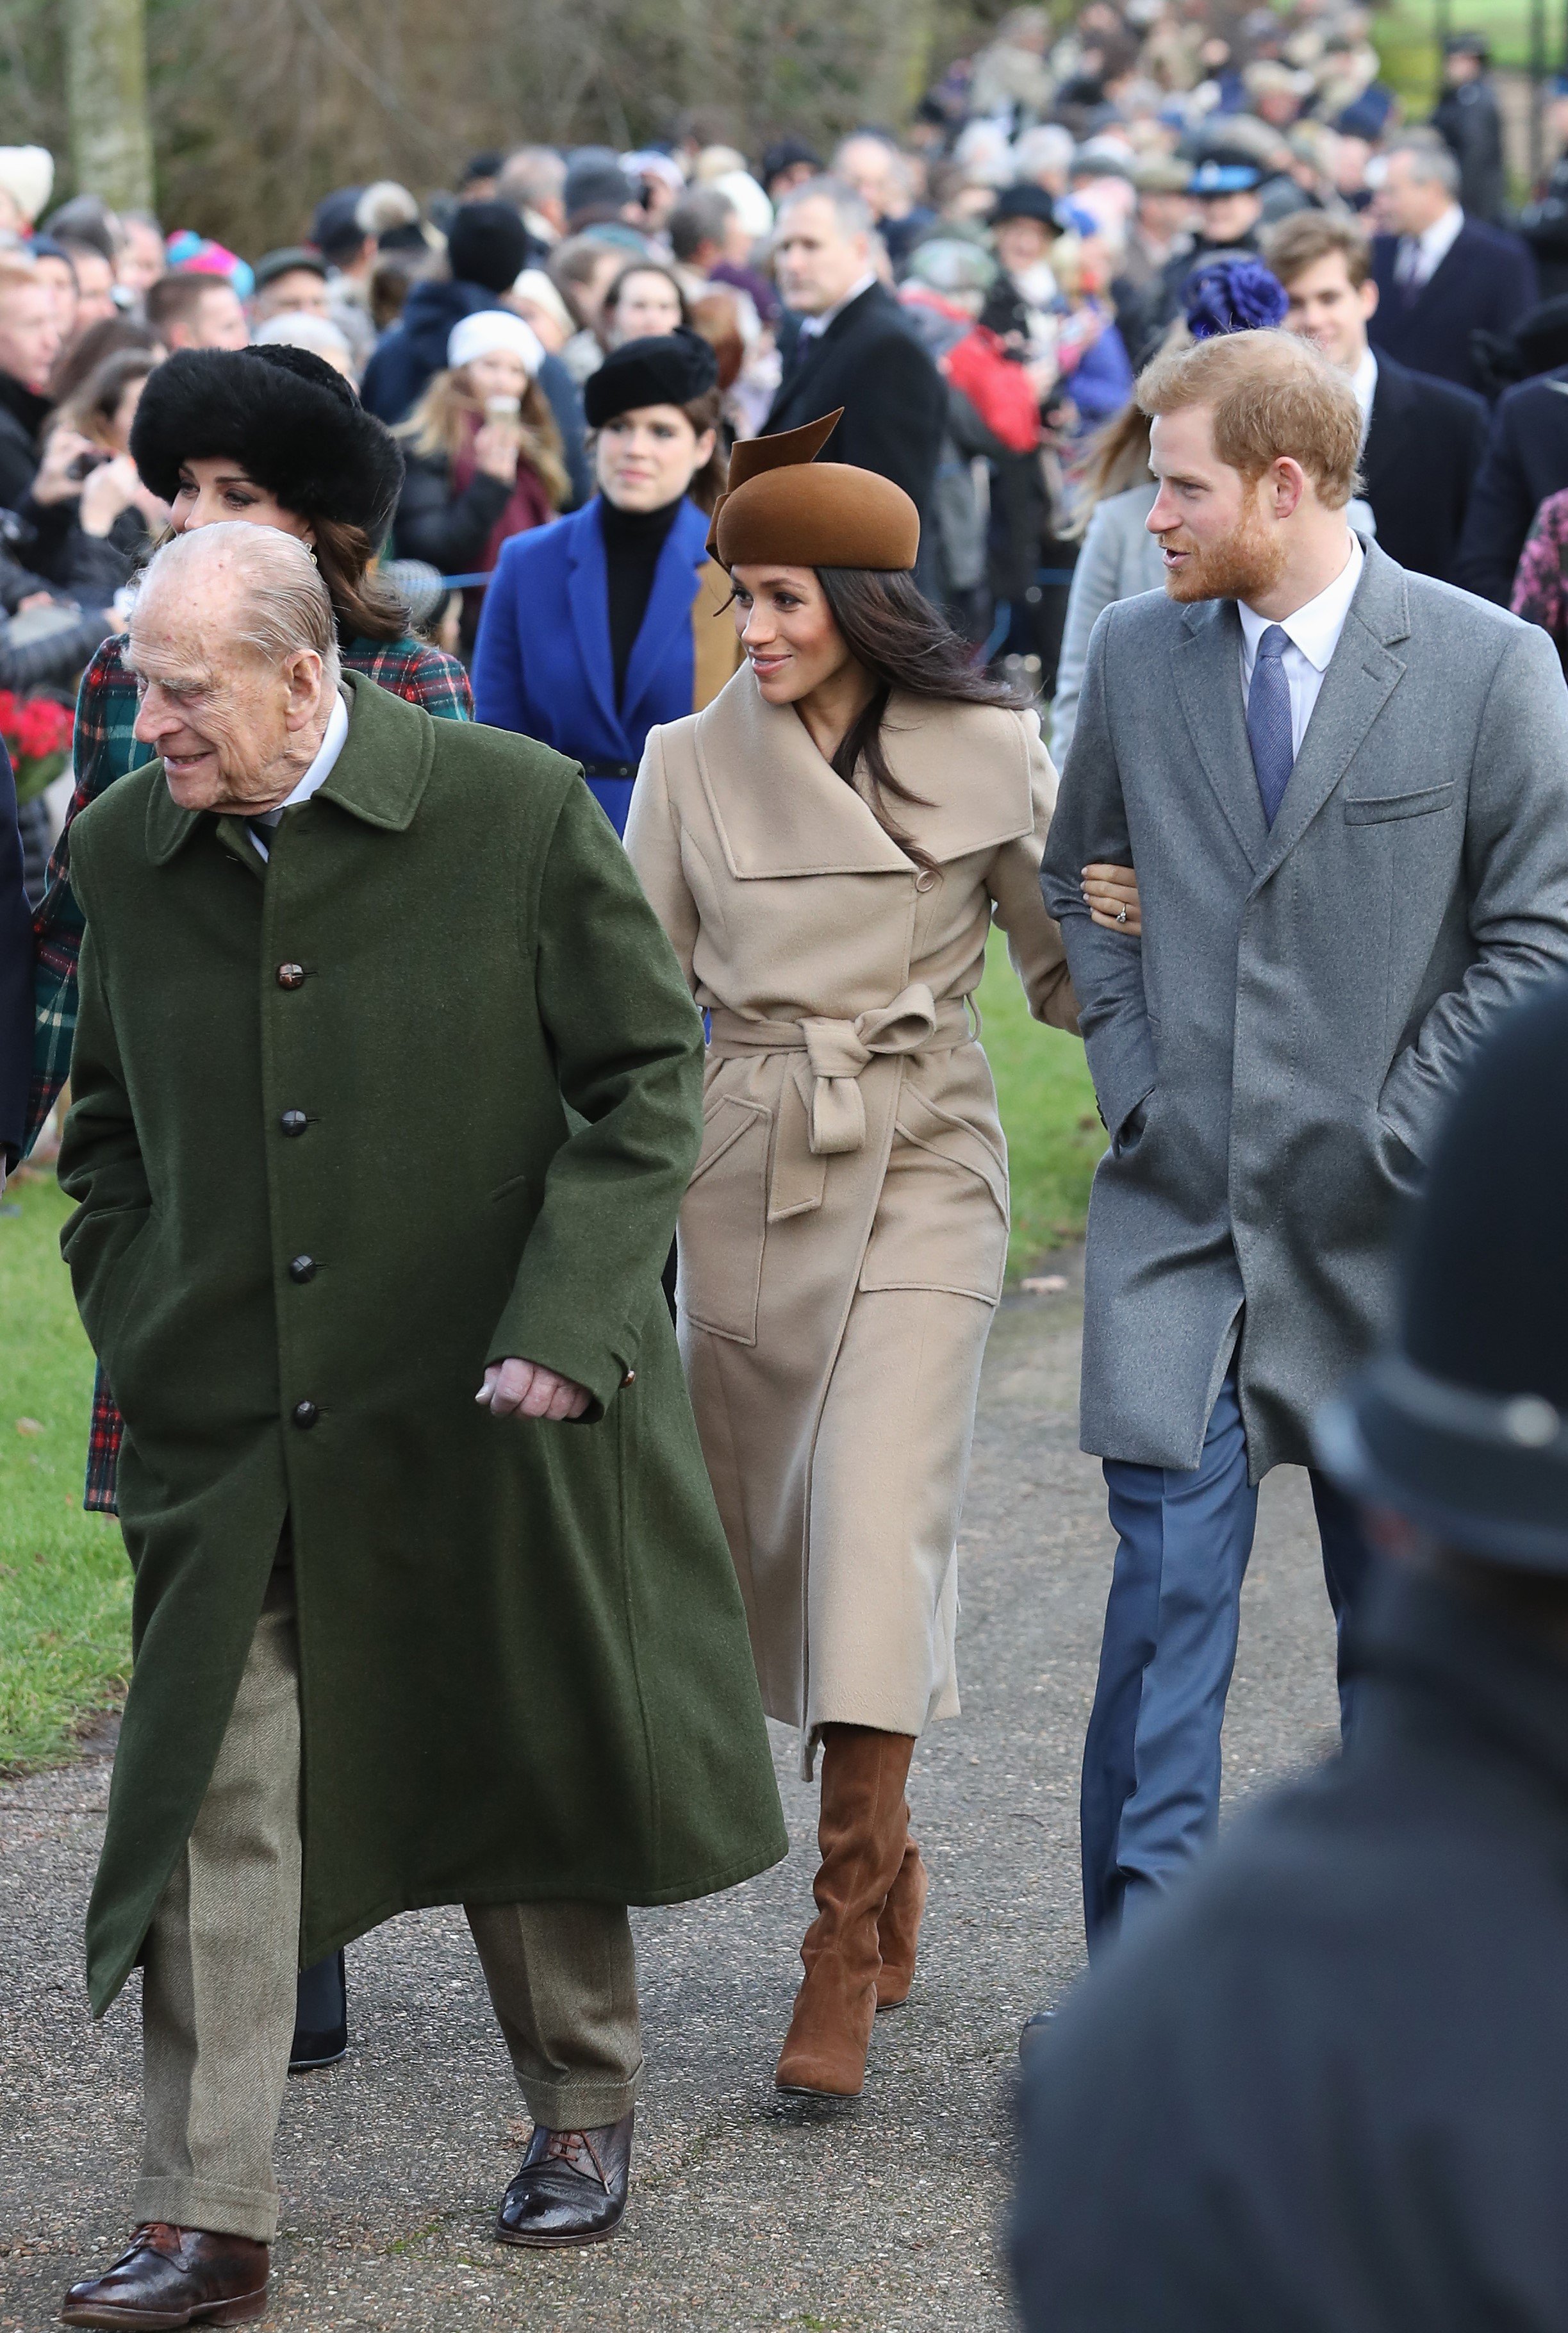 Members of the royal family attend 2017 Christmas Service